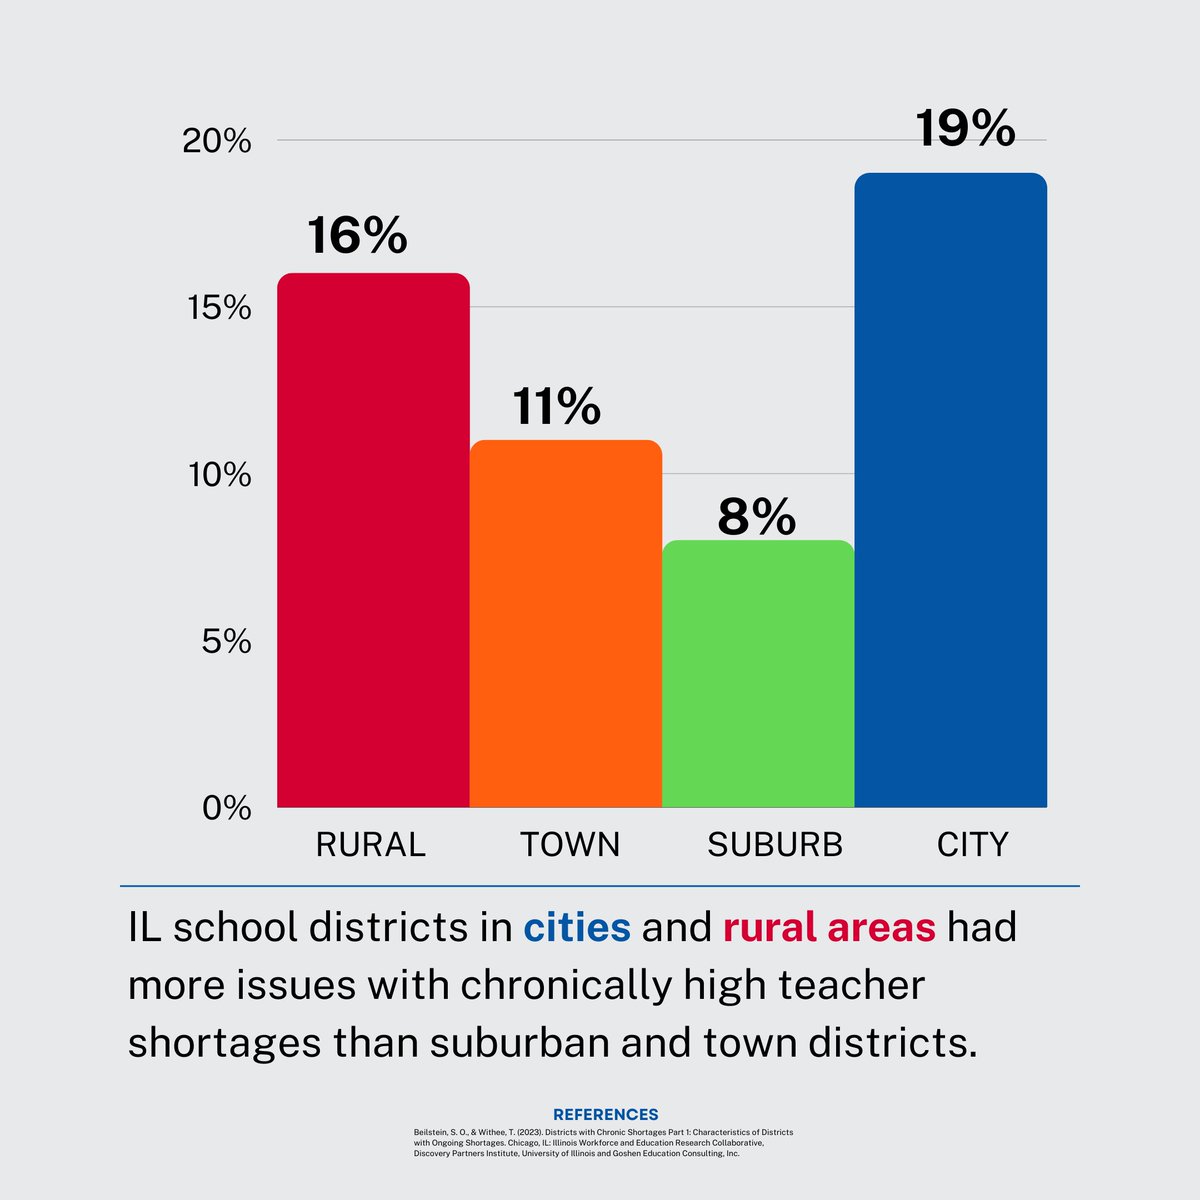 📚 Attention educators and policymakers! 📚 Districts facing chronic teacher shortages come from both rural and urban settings. Let's bridge the gap and empower our schools! #RuralEd #UrbanEducation #TeachersNeeded #Illinois